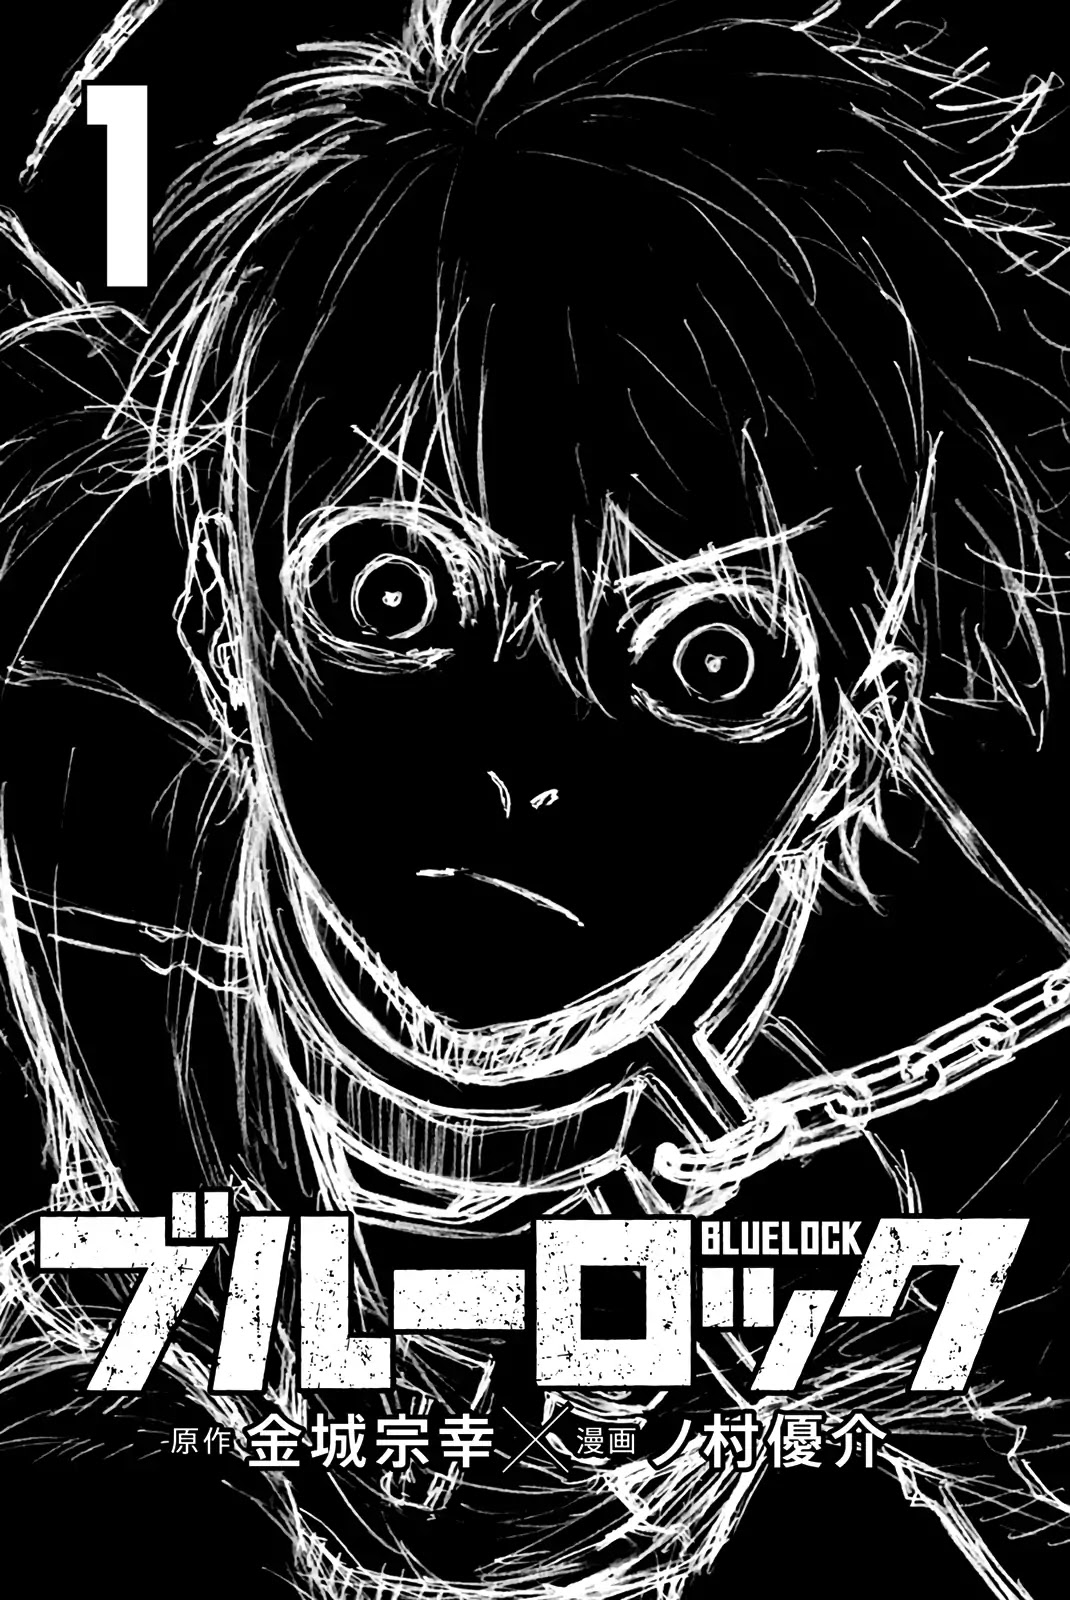 Blue Lock, read Blue Lock, Blue Lock manga, Blue Lock manga online, read Blue Lock manga, blue lock raw, blue lock - raw, blue lock mangakakalot, blue lock mal, blue lock, blue lock reddit, blue lock read, blue lock wiki, blue lock manganelo, blue lock chapter 35, blue lock anime adaptation, read blue lock, kunigami blue lock, chigiri blue lock, bachira blue lock, blue loctite, blue lockdown, bluetooth door lock, bluetooth lock, bluetooth master lock, a blue lock, a blue locket, is blue lock finished, is blue lock good, is blue lock going to be animated, is blue lock shonen jump, is blue lock bl, is blue lock in english, team a blue lock, what does a blue lock mean on ao3, blue lock anime, blue lock anime release date, blue lock author, blue lock ao3, blue lock anri, blue lock arcs, blue lock anime trailer, blue lock art, blue lock announcement, blue lock anime episode 1, blue lock bachira, blue lock barou, blue lock best panels, blue lock birthdays, blue lock bahasa indonesia, blue lock baka, blue lock best player, blue lock background, blue lock book, blue lock buy manga, blue lock characters, blue lock chapter 1, blue lock chapter 137, blue lock chapter 130, blue lock colored manga, blue lock chapters, blue lock chapter 136, blue lock chapter 133